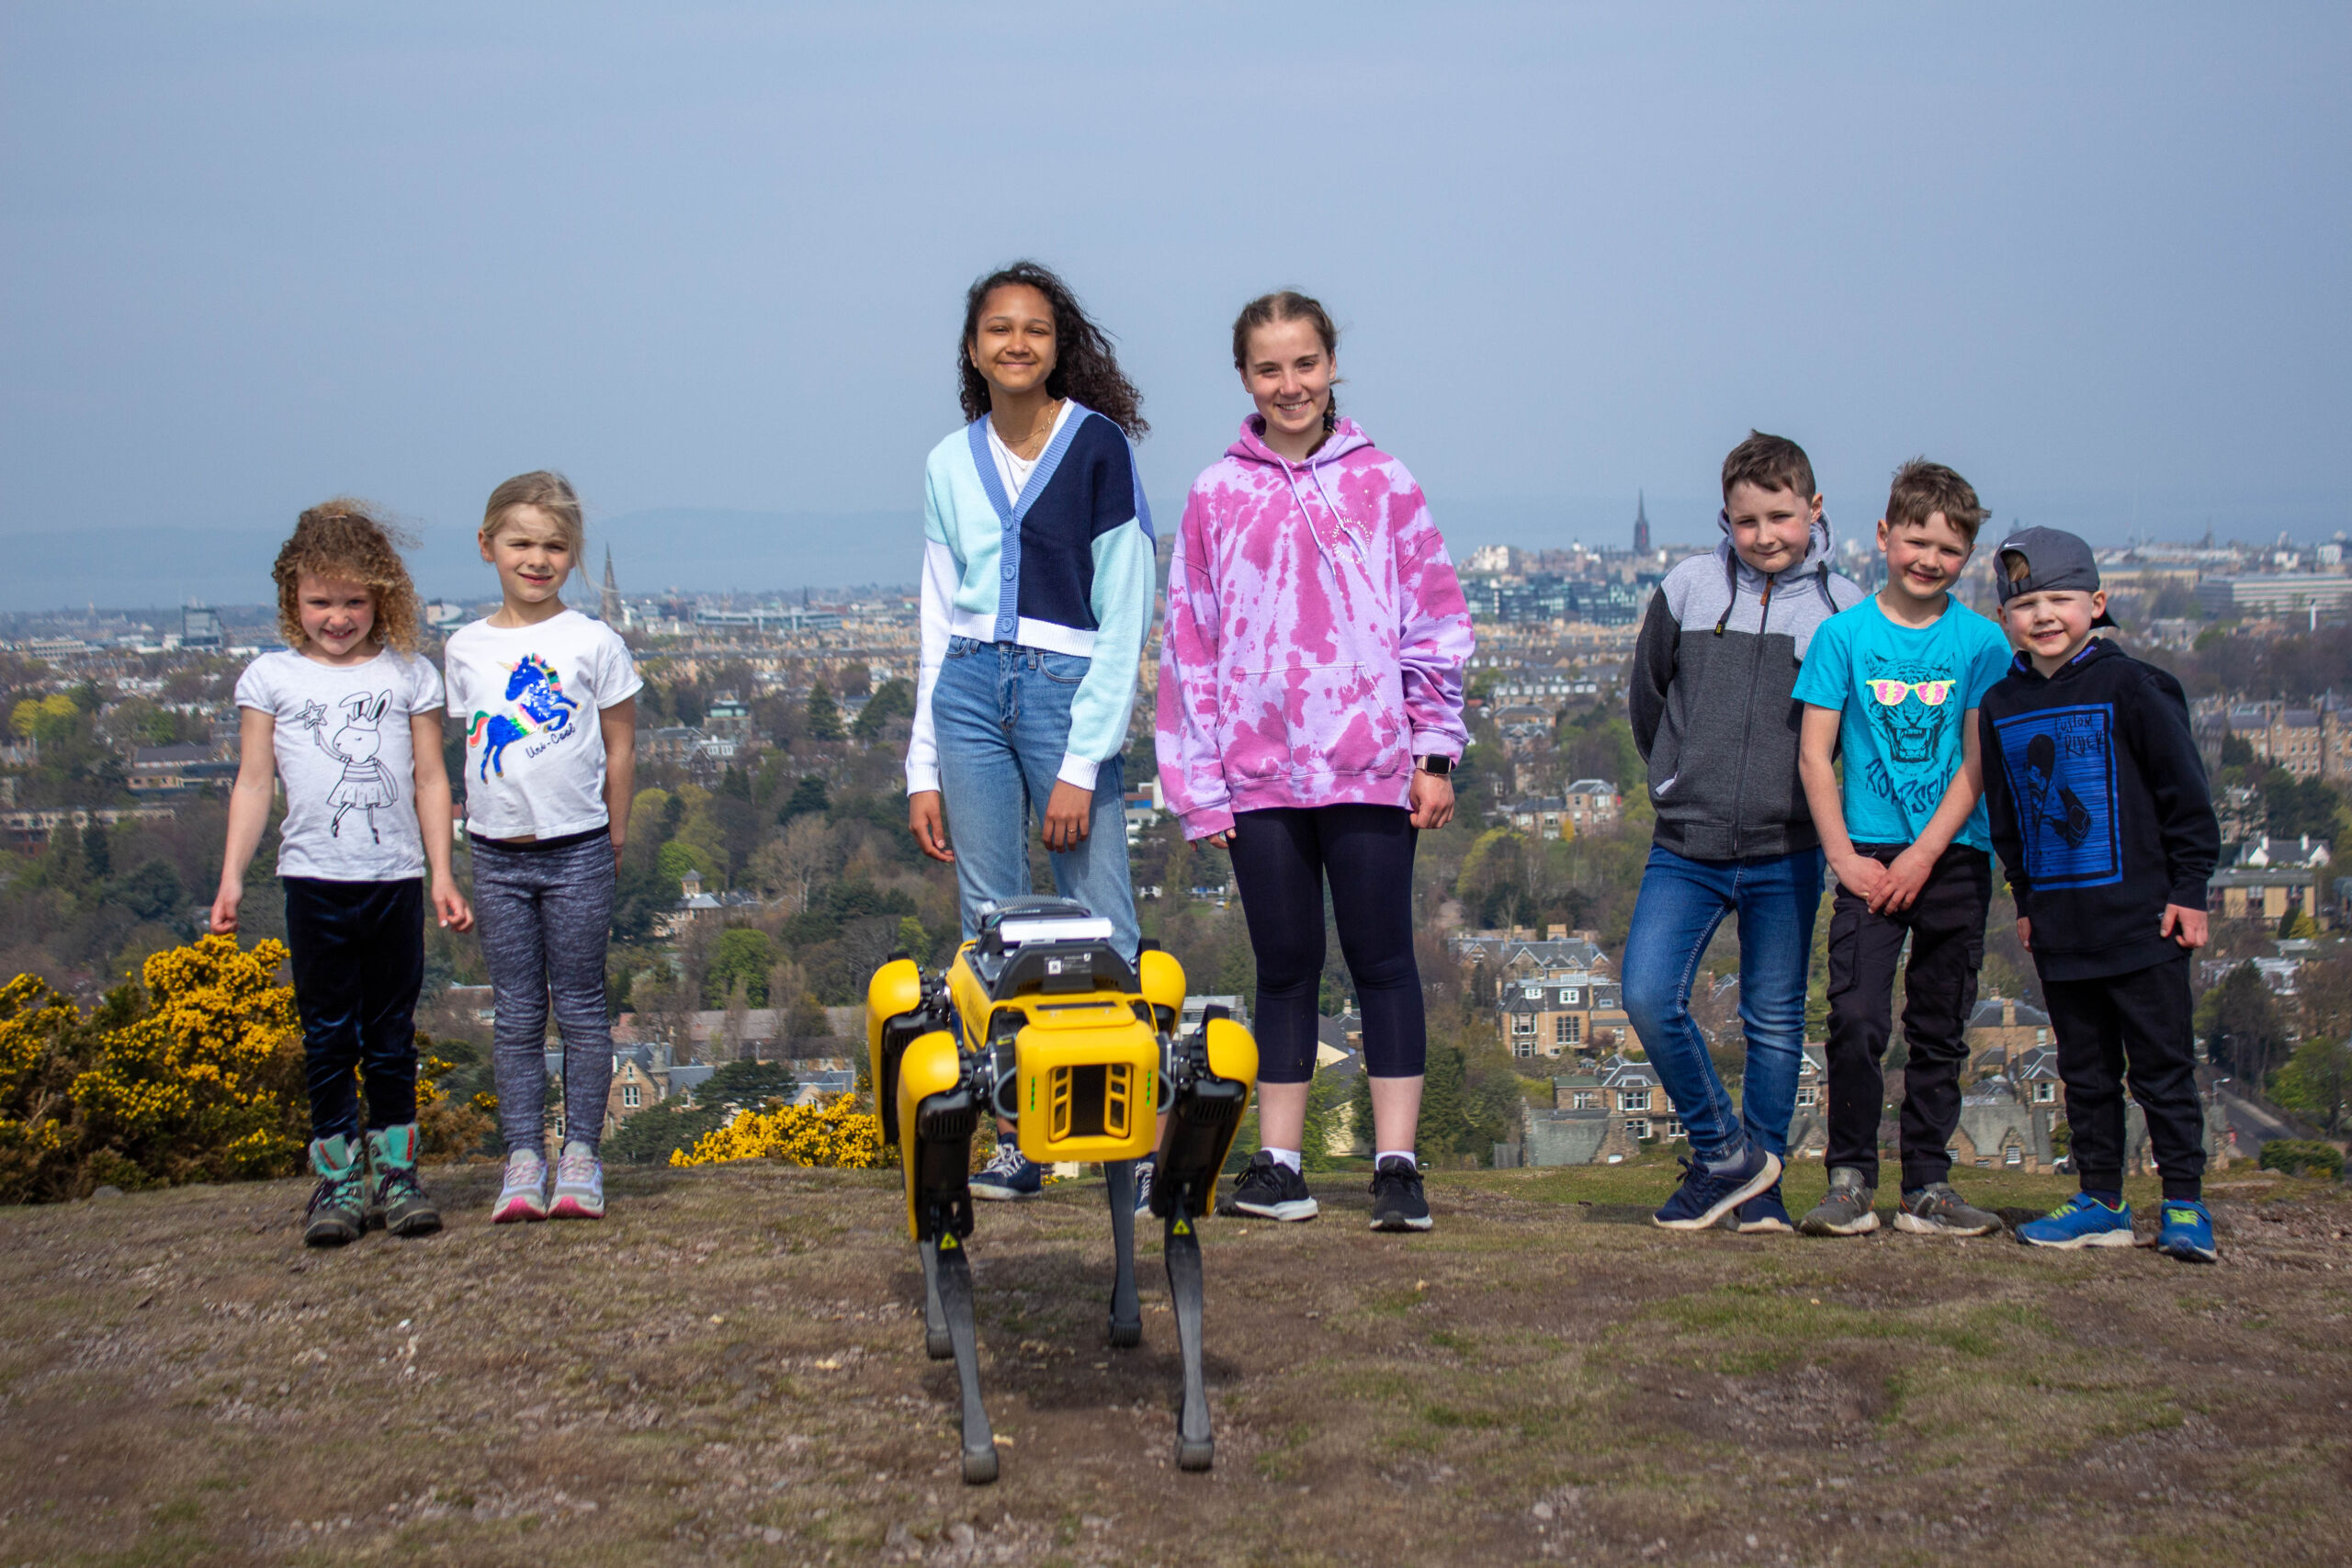 School pupils on a hill with robot dog